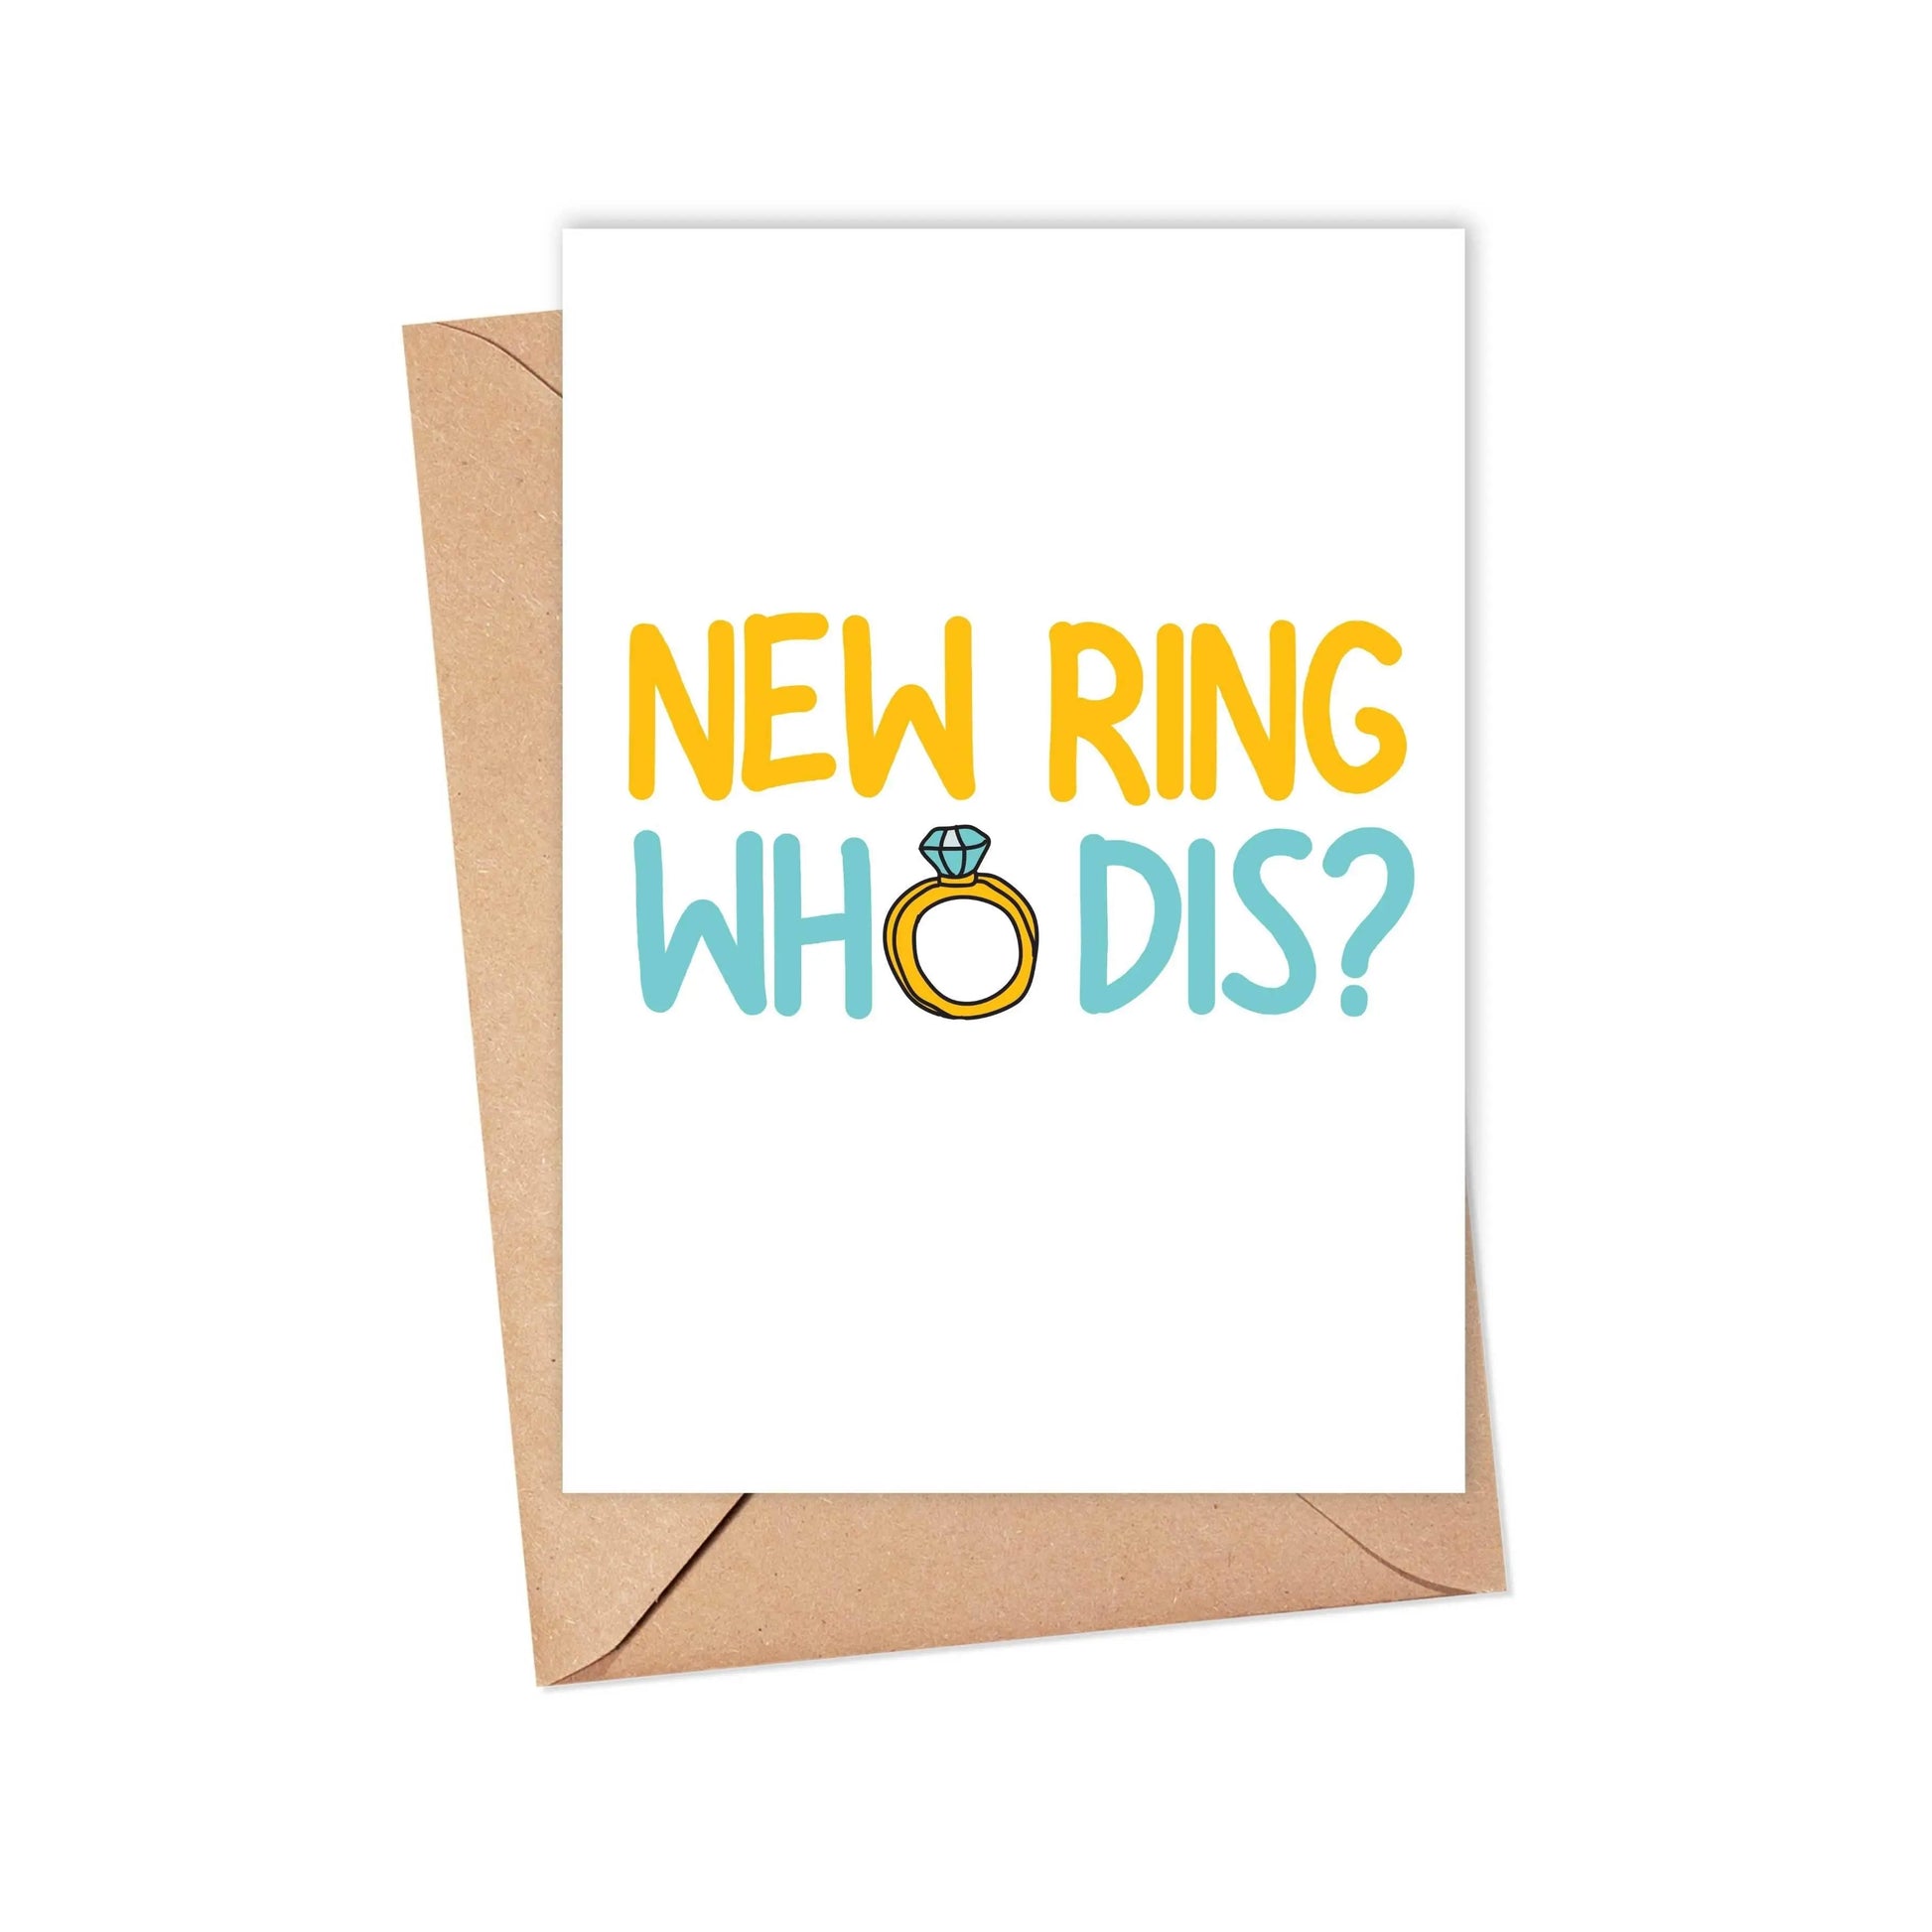 Funny Engagement Card New Ring Wedding Greeting Cards Bride R is for Robo